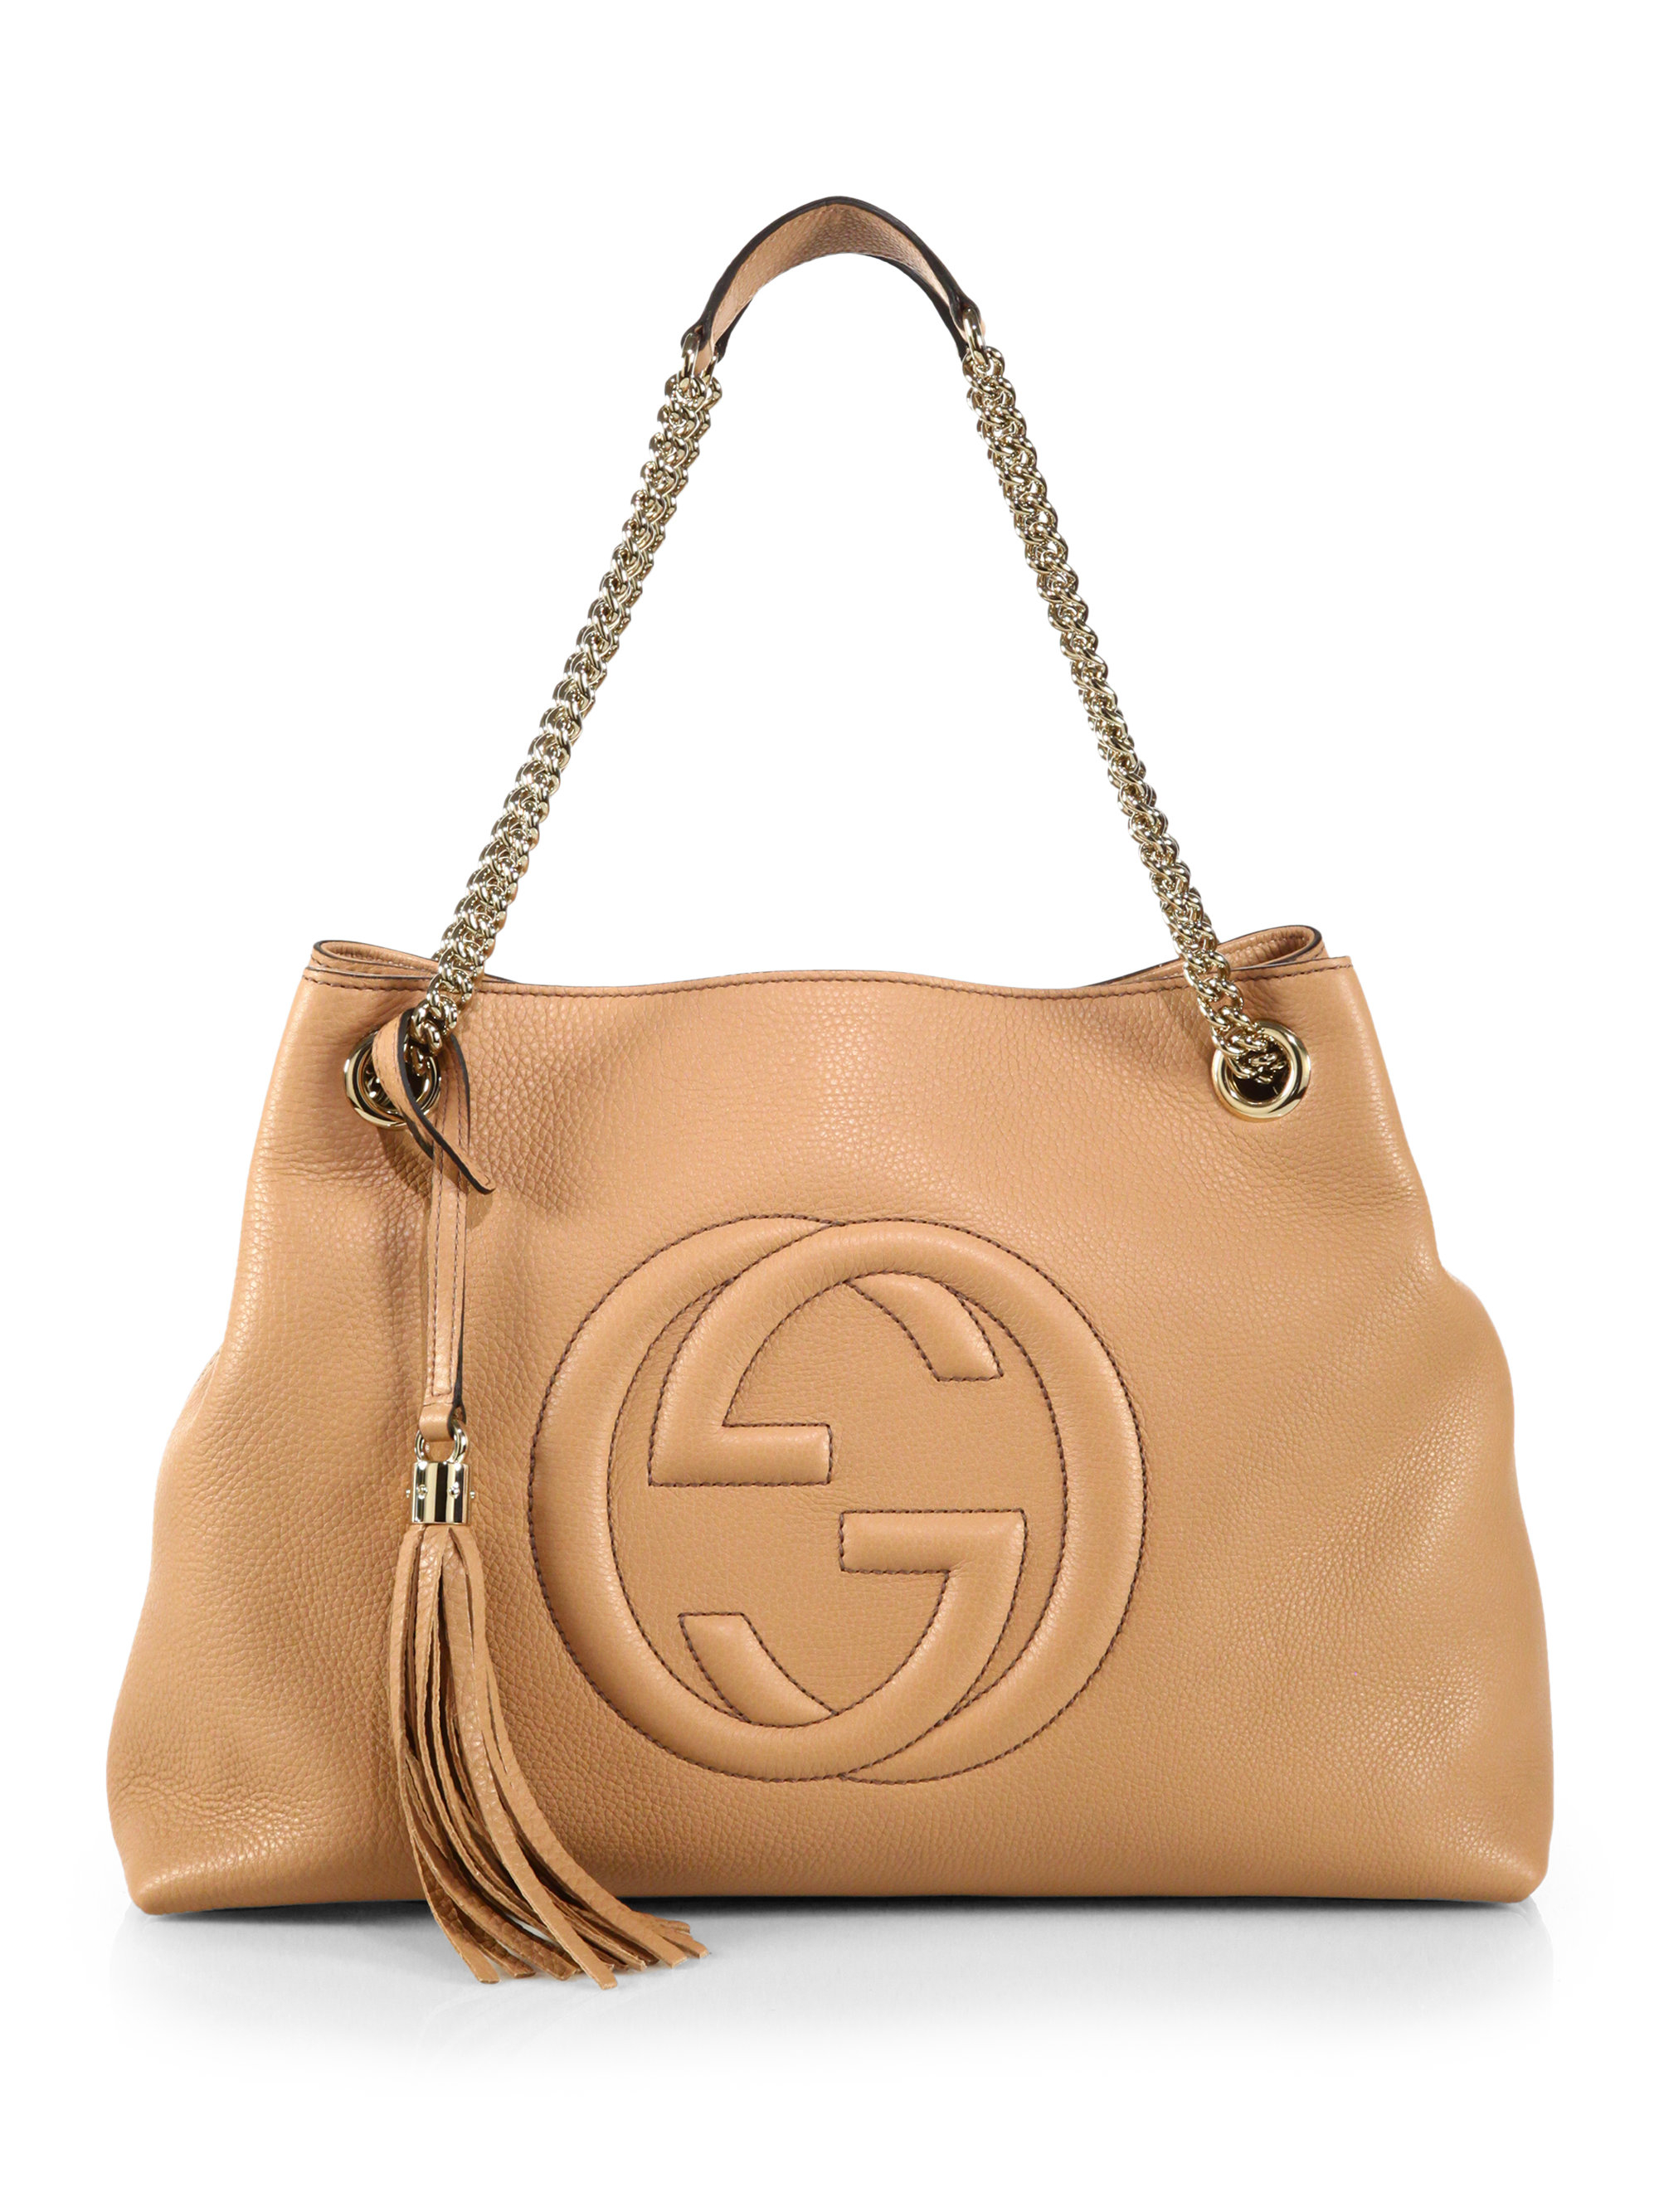 Gucci Soho Leather Shoulder Bag in Brown - Lyst